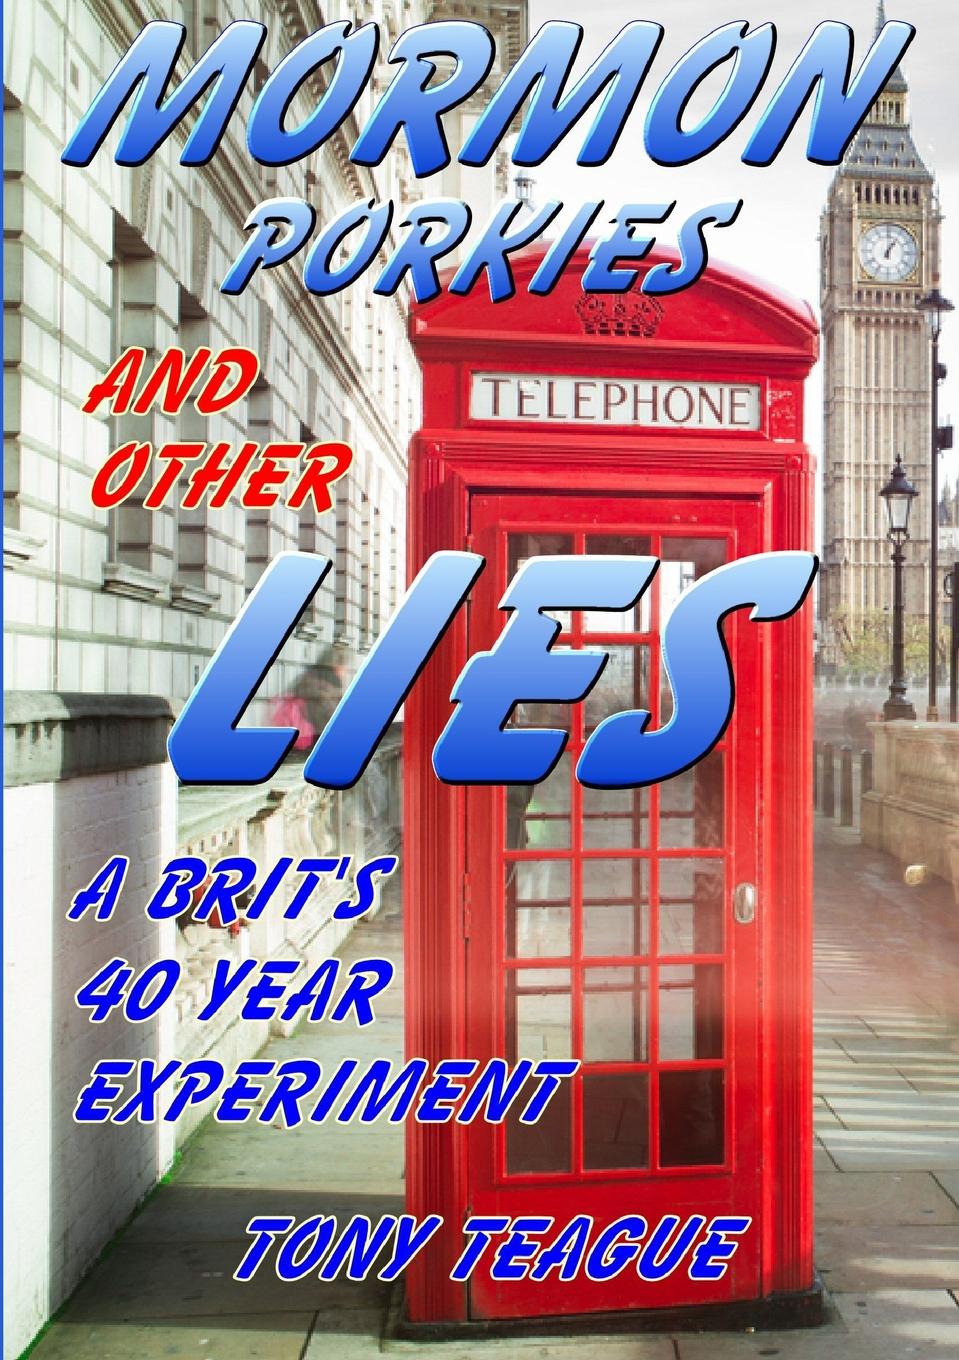 Mormon Porkies and Other Lies - A Brit.s 40 Year Experiment